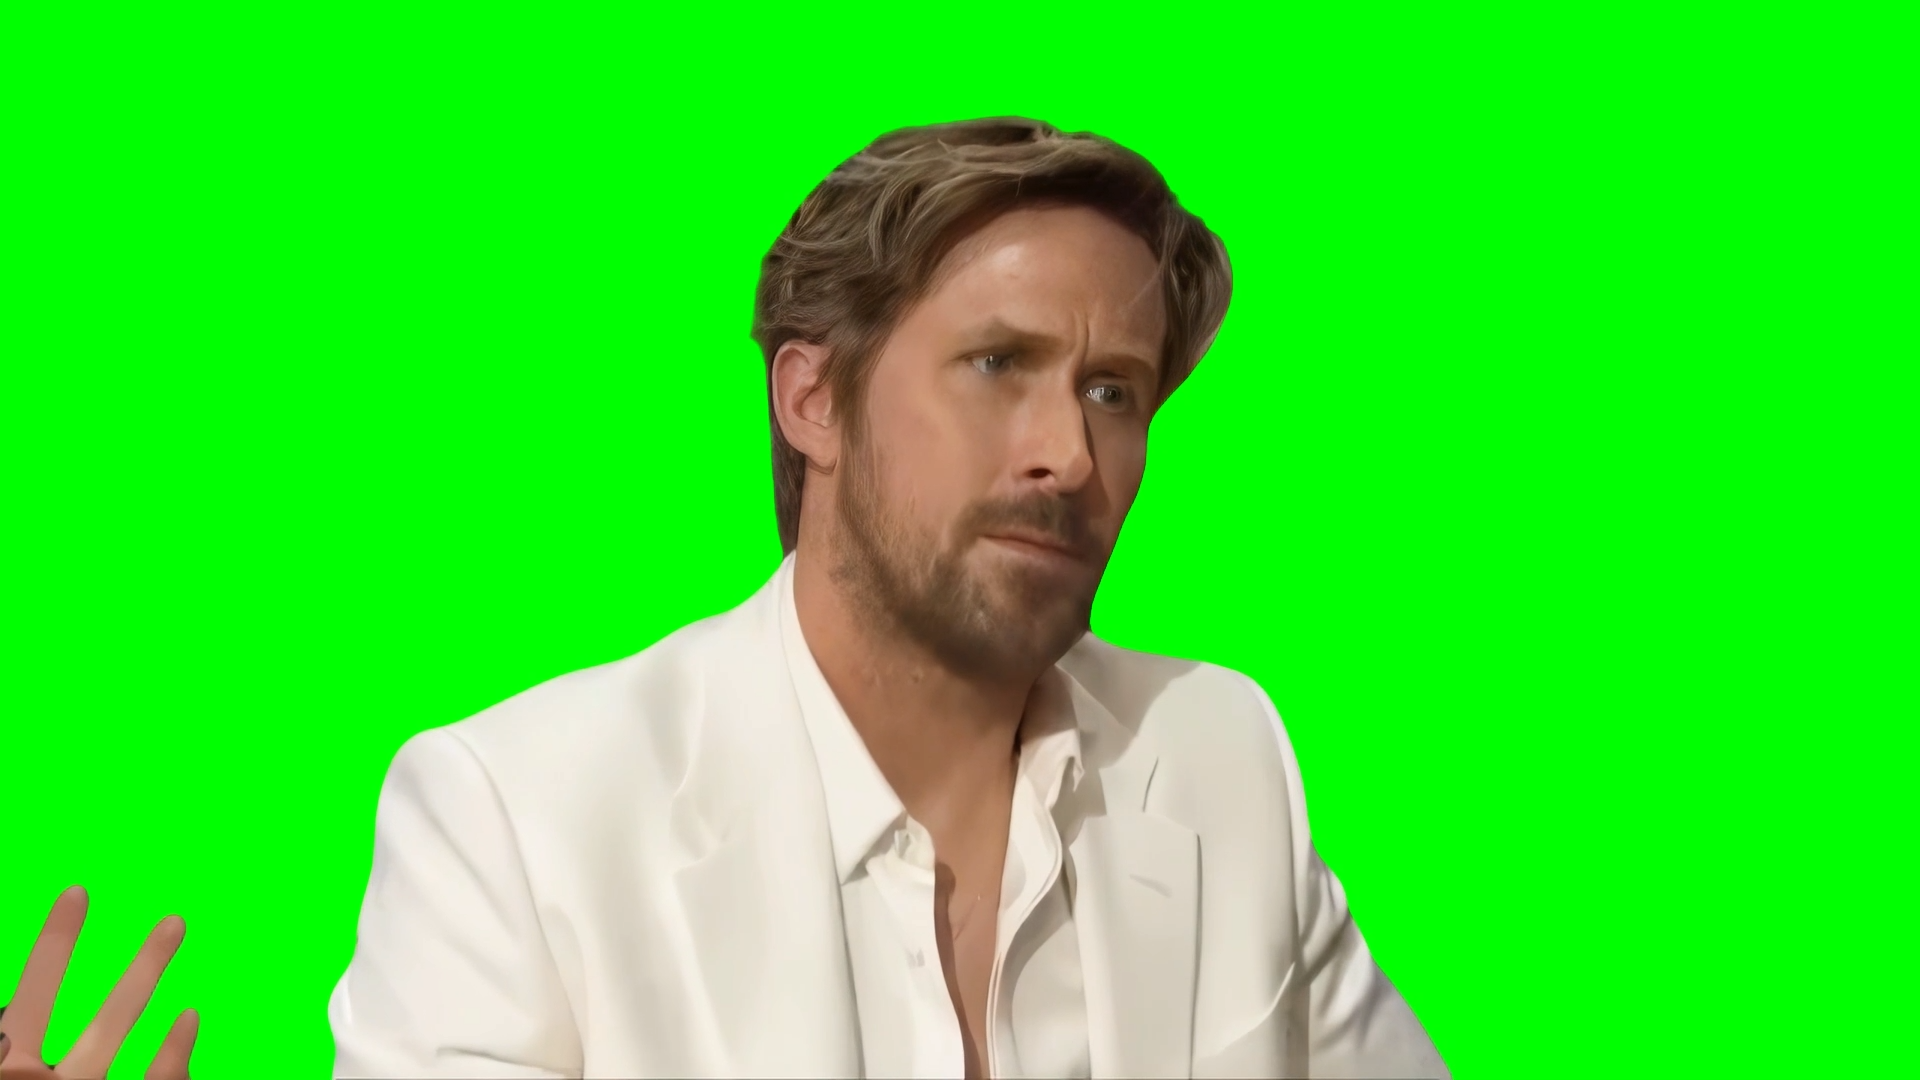 Ryan Gosling looking confused after winning award for I'm Just Ken song (Green Screen)